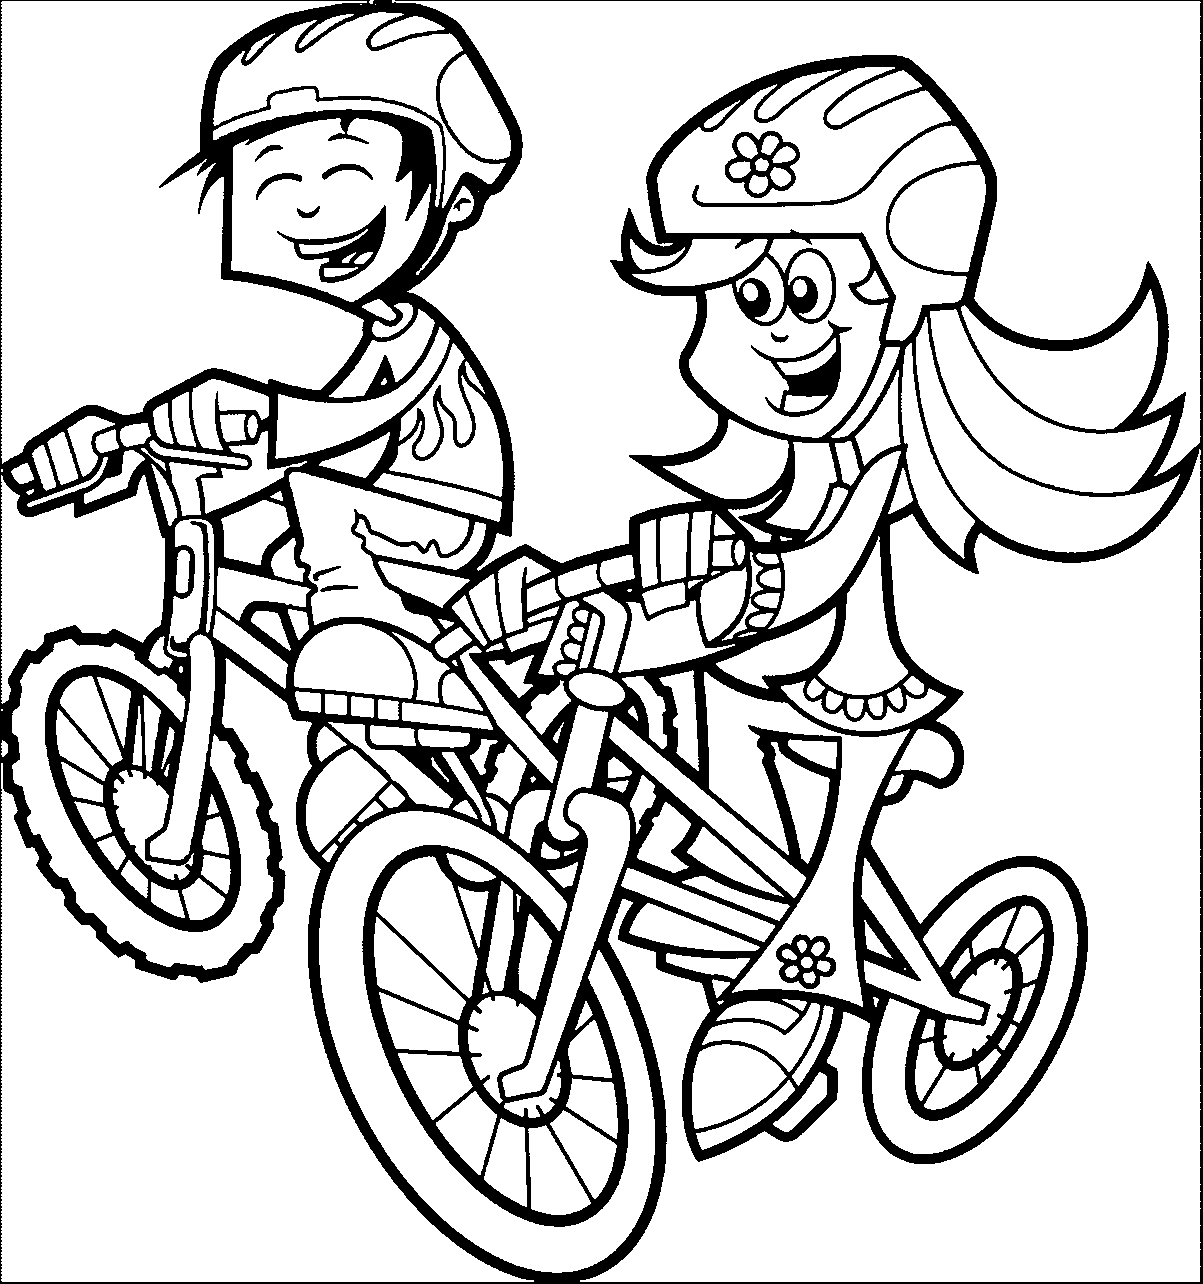 Riding Bike Coloring Pages | Wecoloringpage